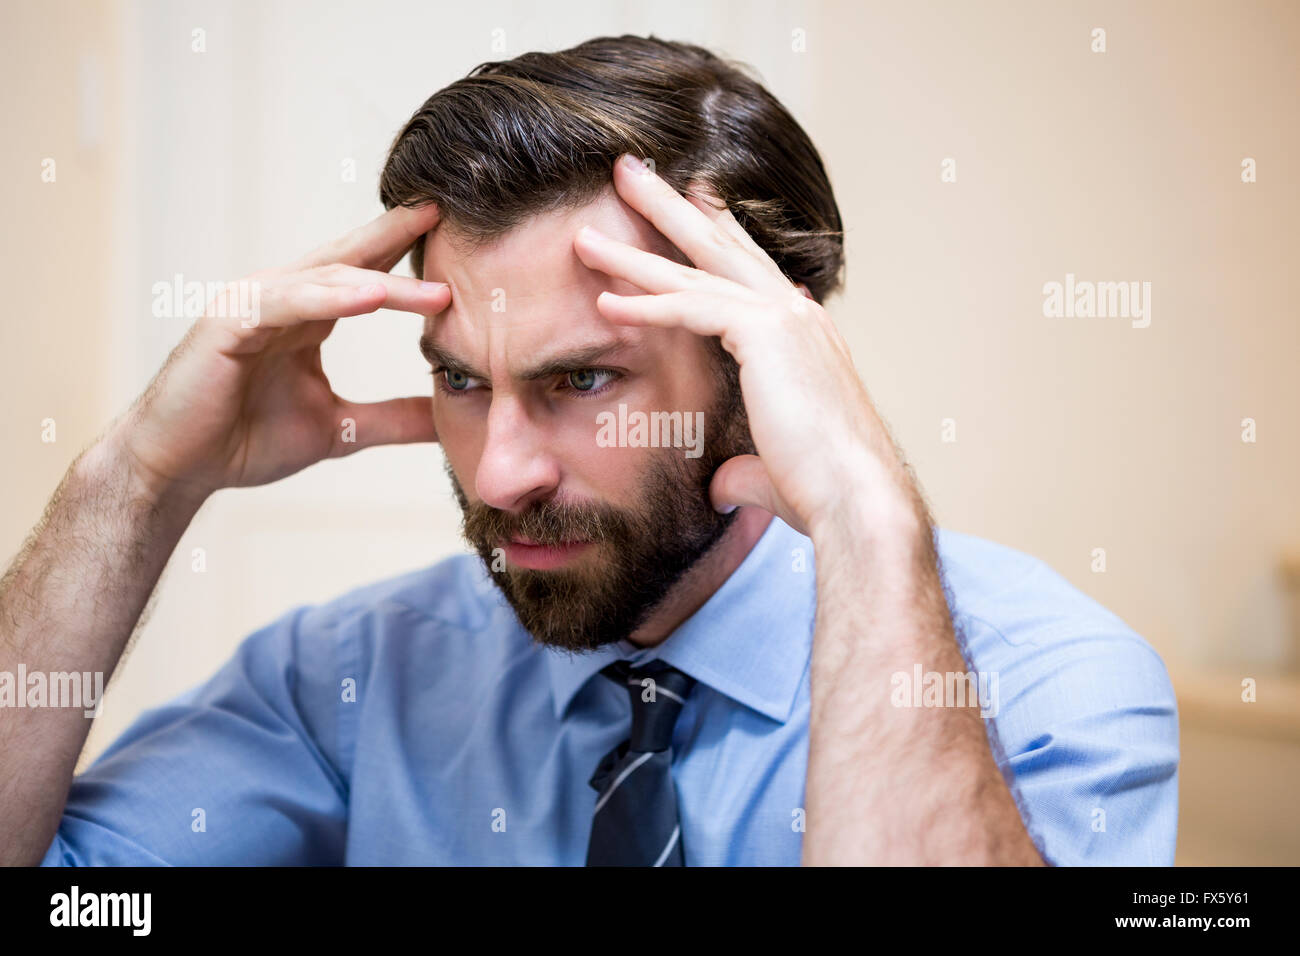 Close up of tensed man with hands on forehead Stock Photo